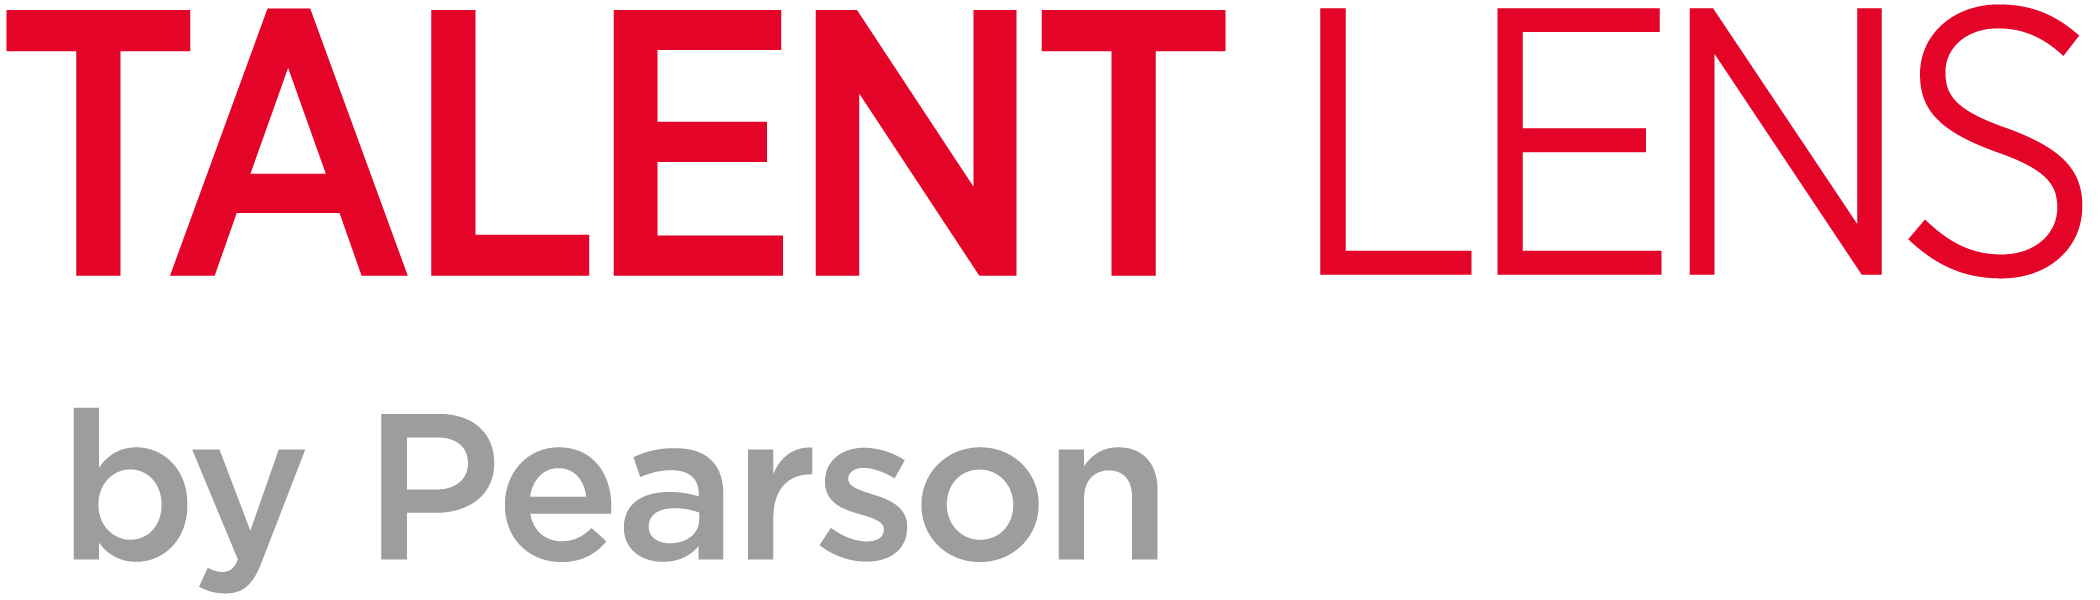 Talent Lens by Pearson